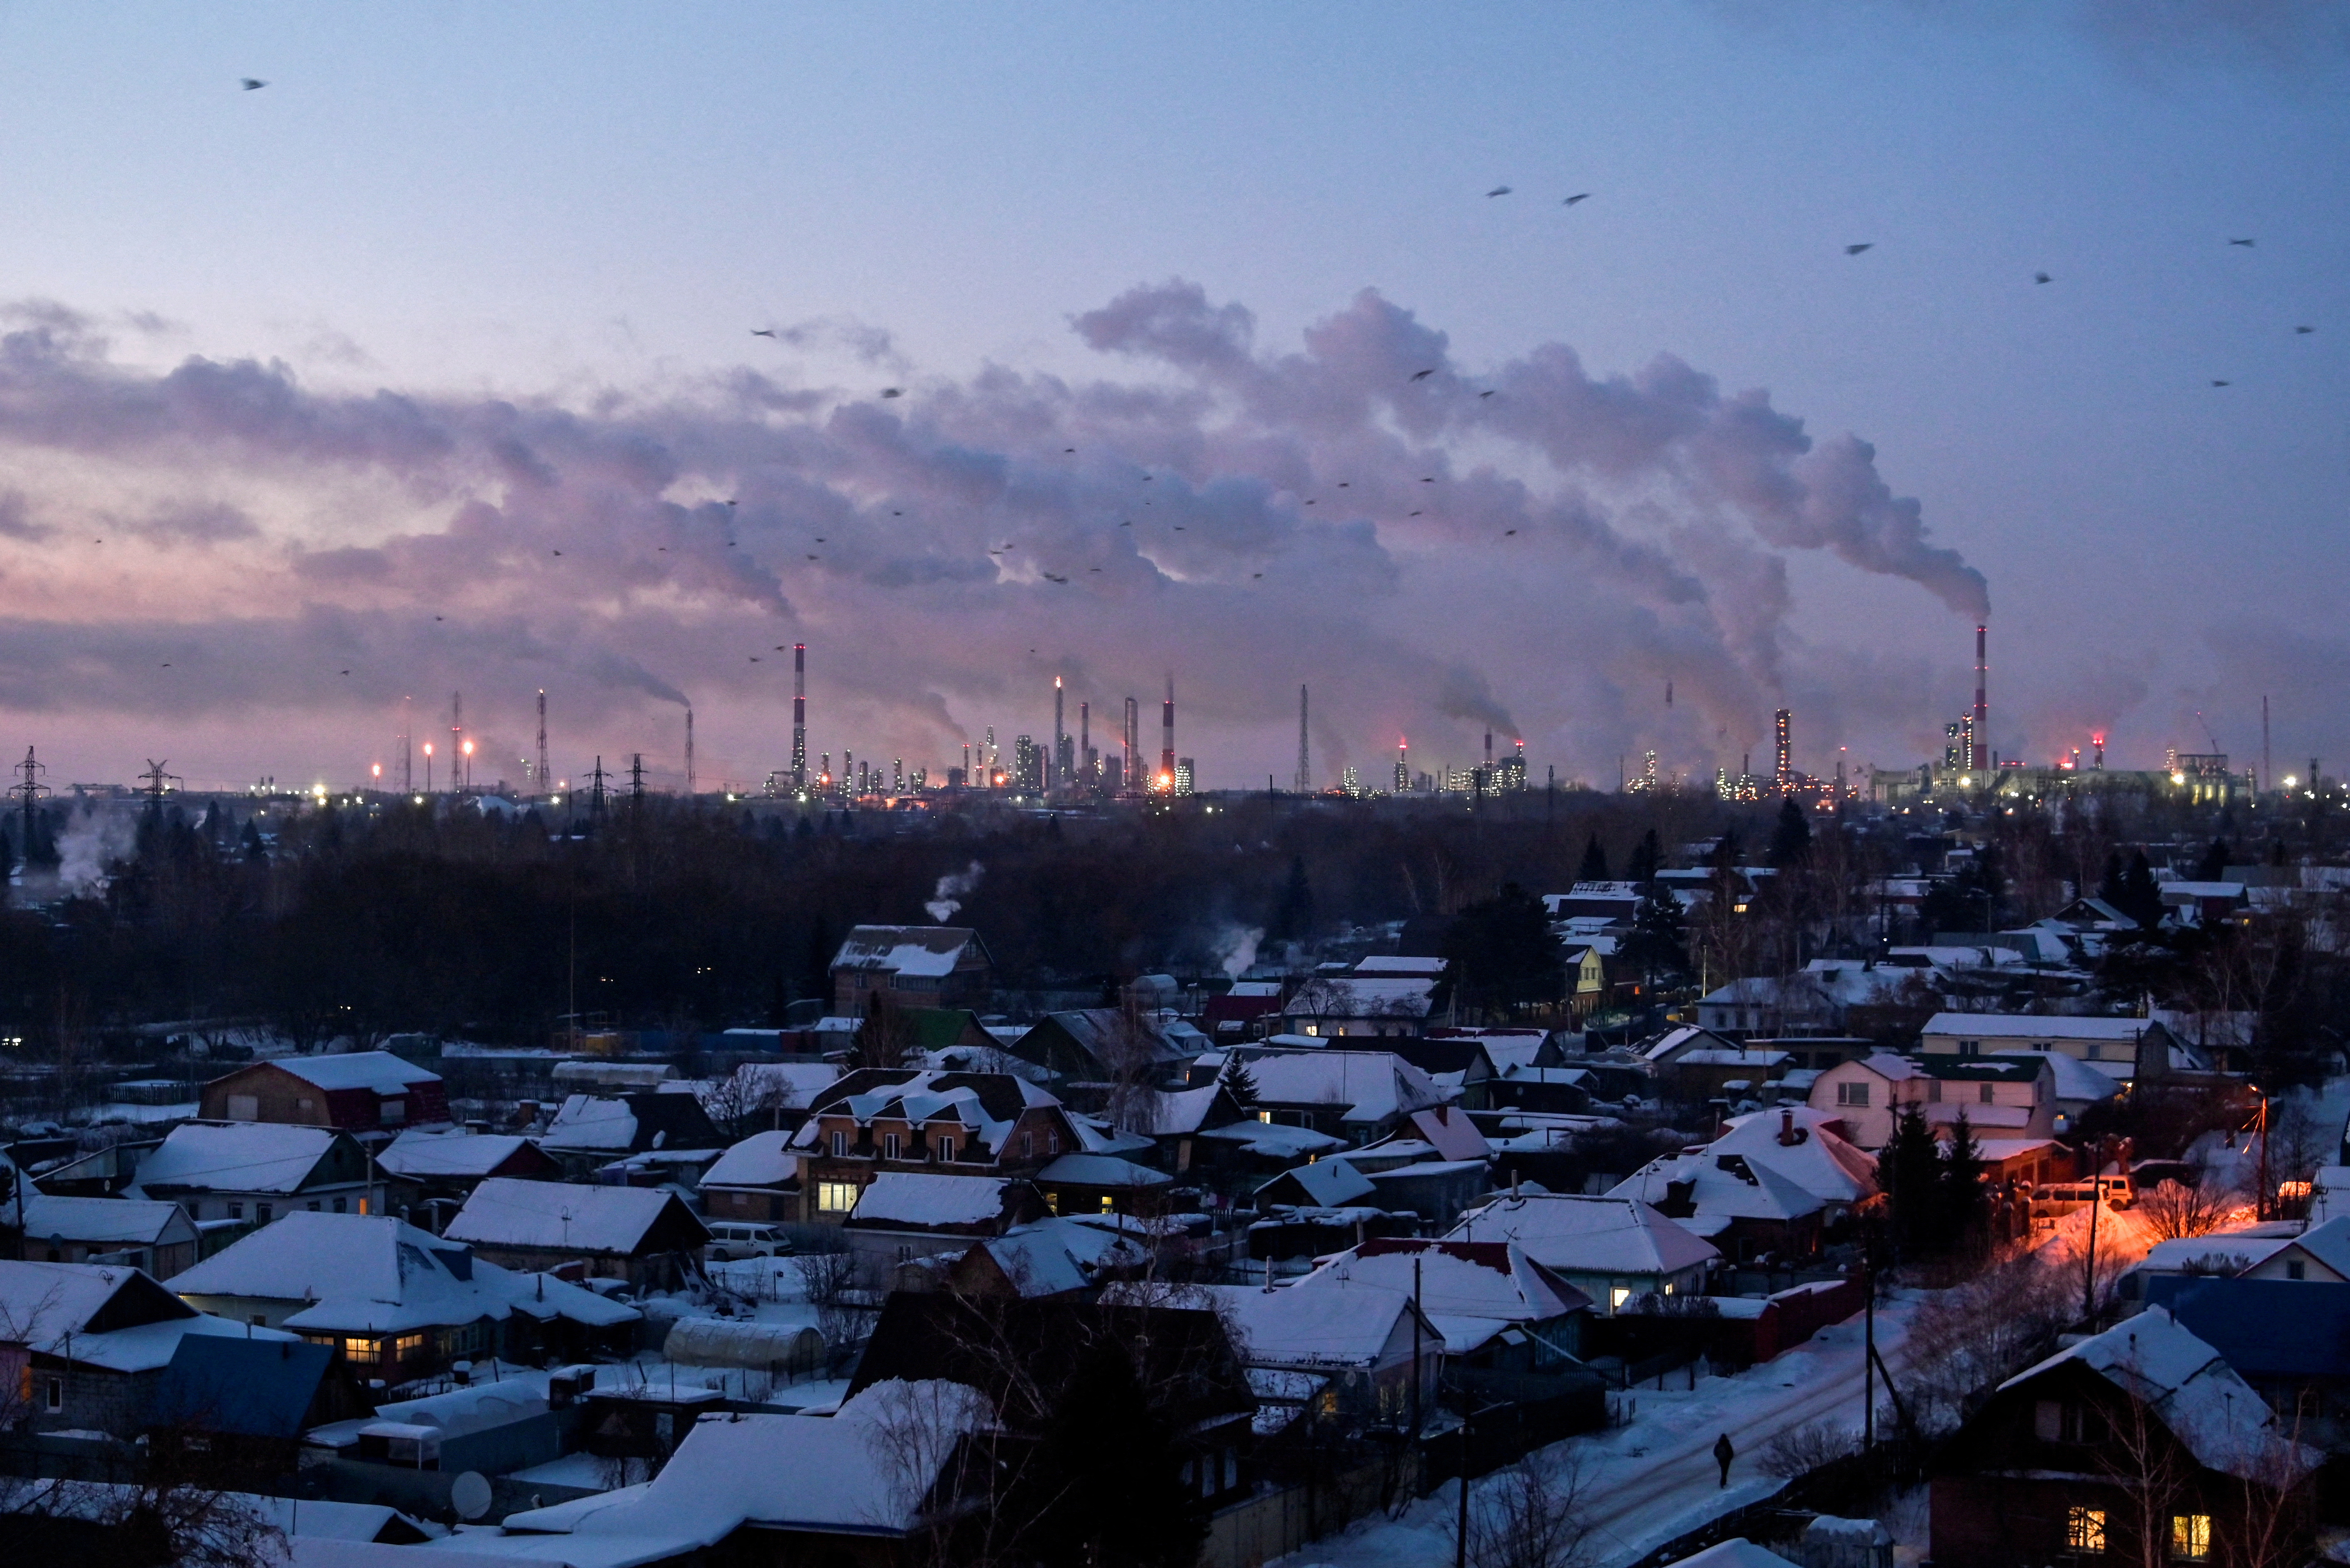 Flue gas and steam rise out of chimneys in Omsk